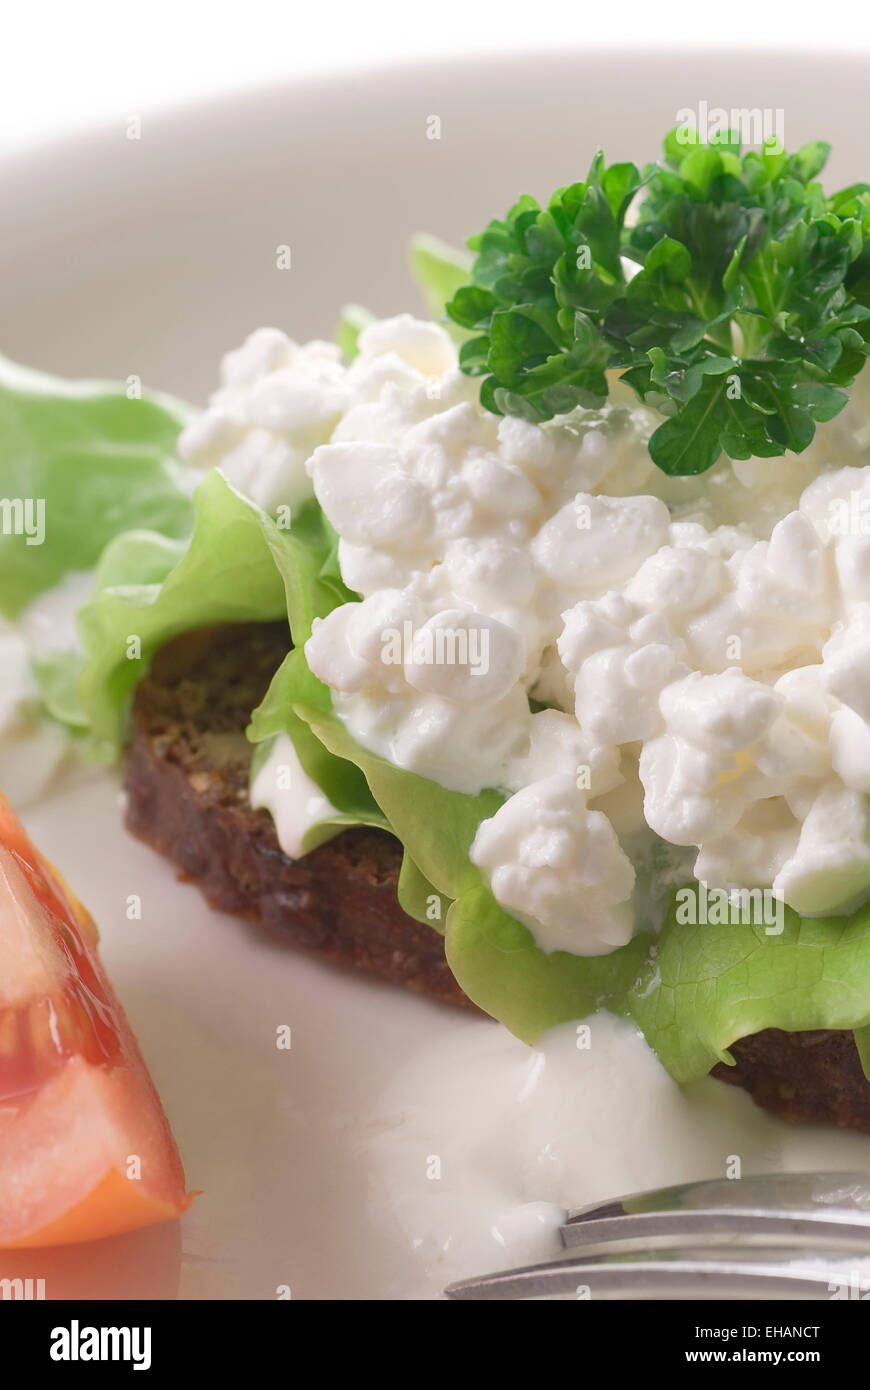 Rye bread with cottage cheese, lettuce, parsley and tomato. Stock Photo